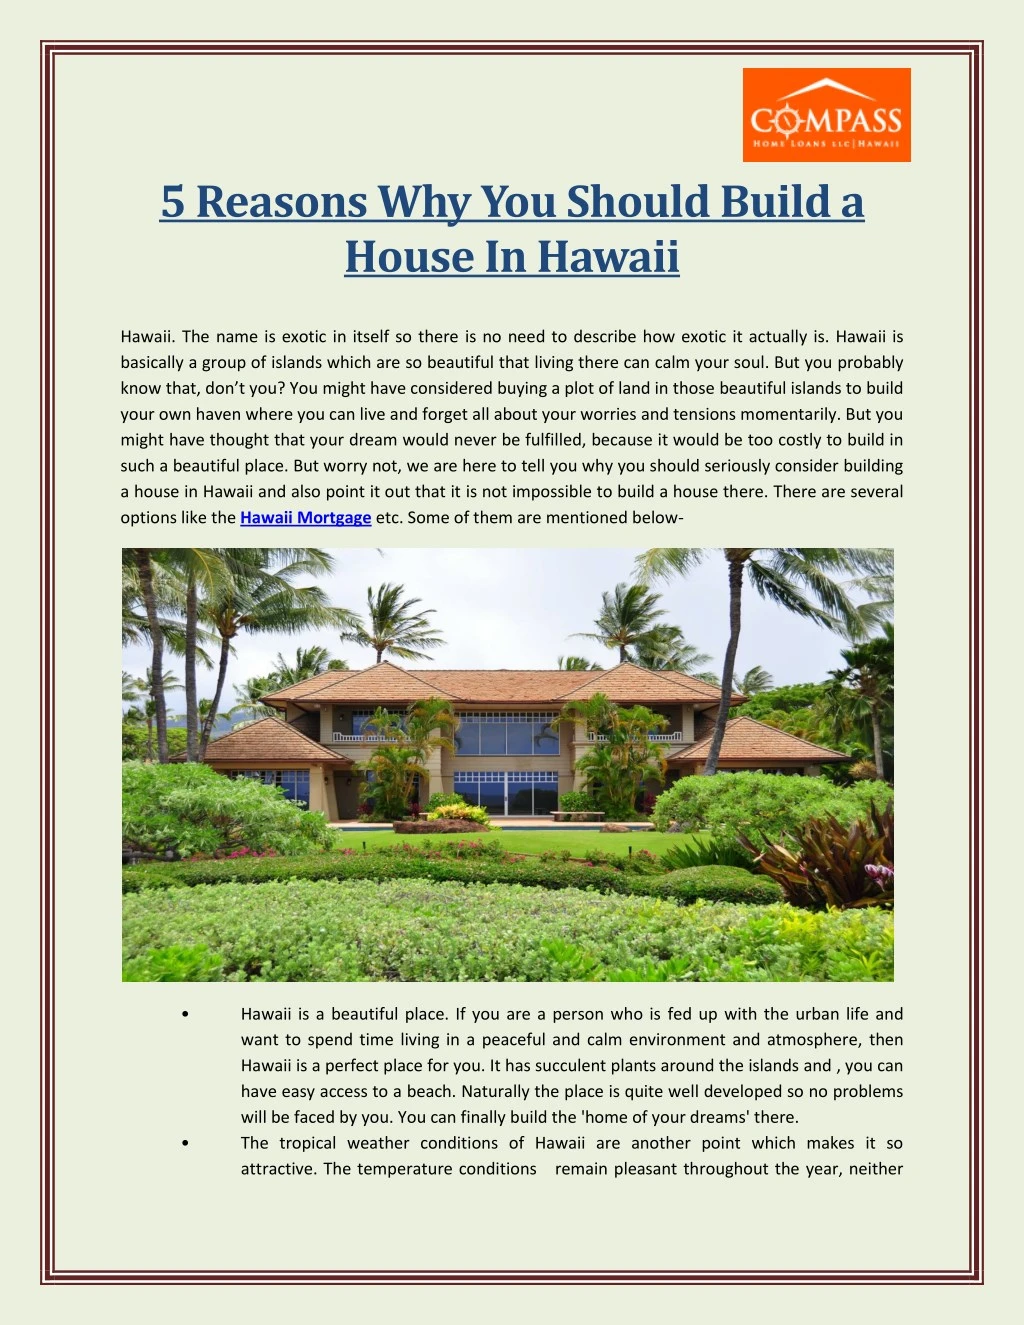 5 reasons why you should build a house in hawaii